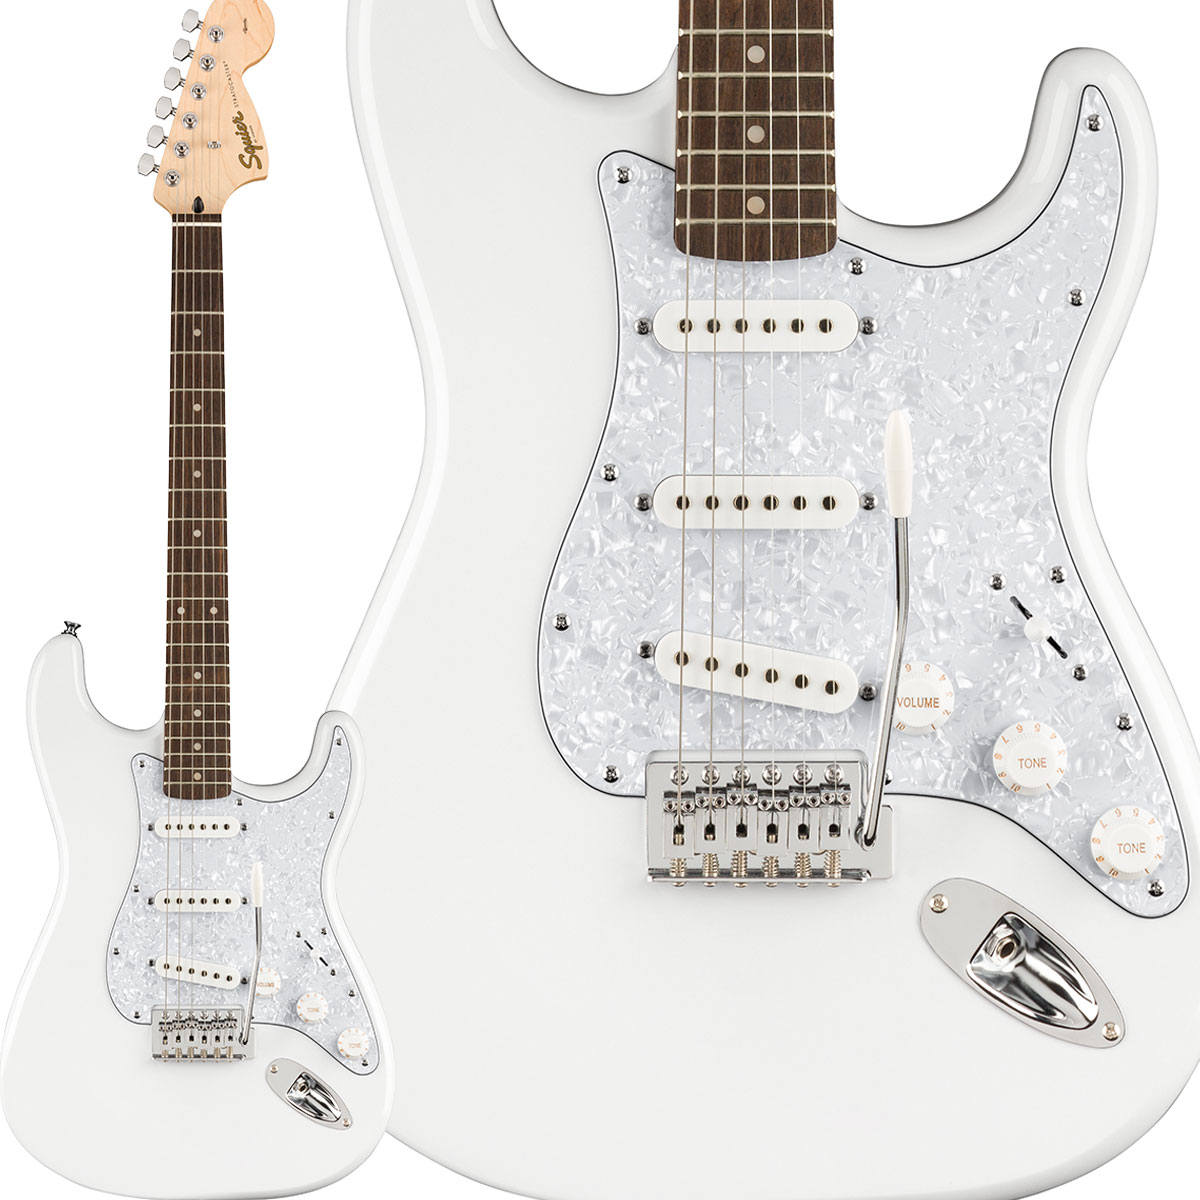 Squier by Fender FSR Affinity stratocaster White Pearl Arctic White  ストラトキャスター エレキギター スクワイヤー / スクワイア 【 イオンモール名取店】